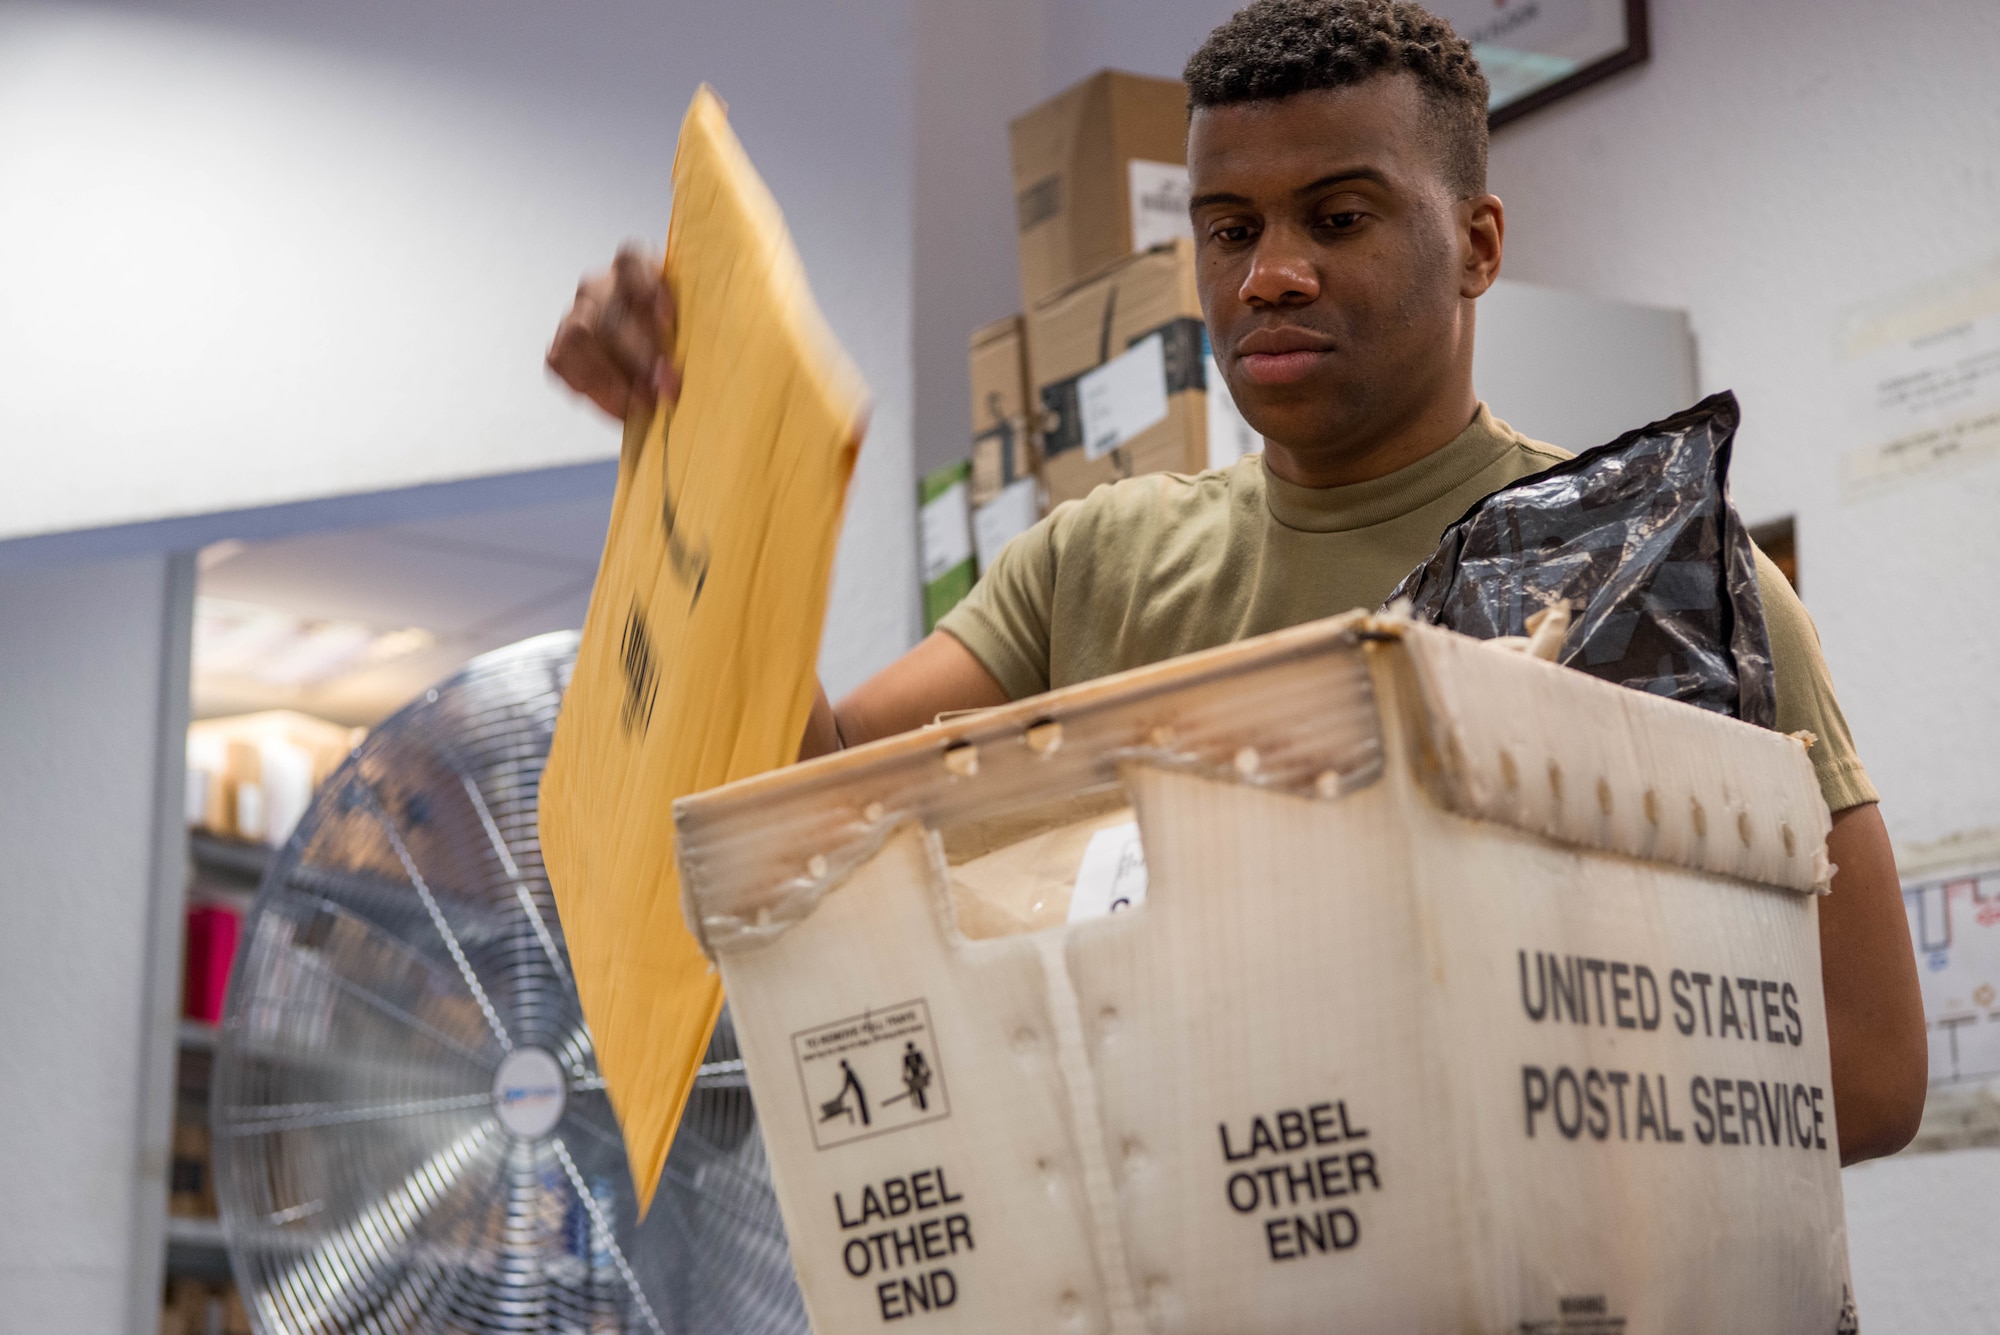 U.S. Air Force Airman 1st Class Michael Troutman, 786th Force Support Squadron military postal clerk, sorts mail at the Northside Post Office at Ramstein Air Base, Germany, Oct. 28, 2020. The post office uses a collection of bins and containers to sort and store mail for customers. (U.S. Air Force photo by Senior Airman Noah Coger)